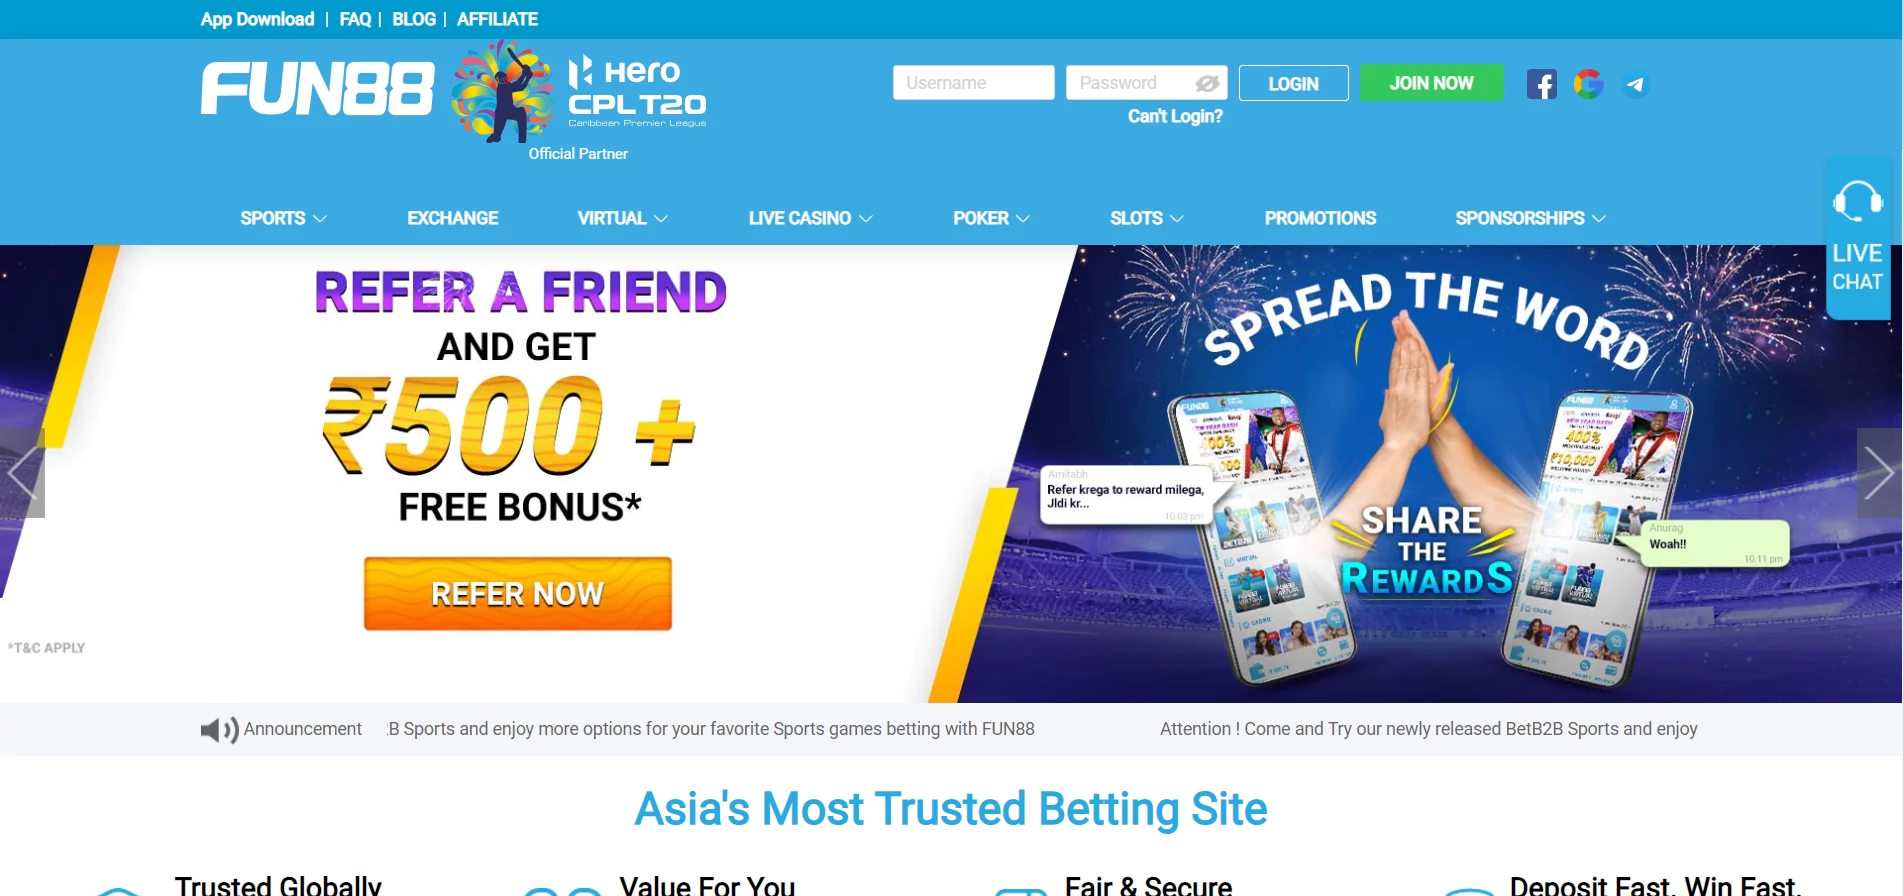 The sports betting Thailand That Wins Customers